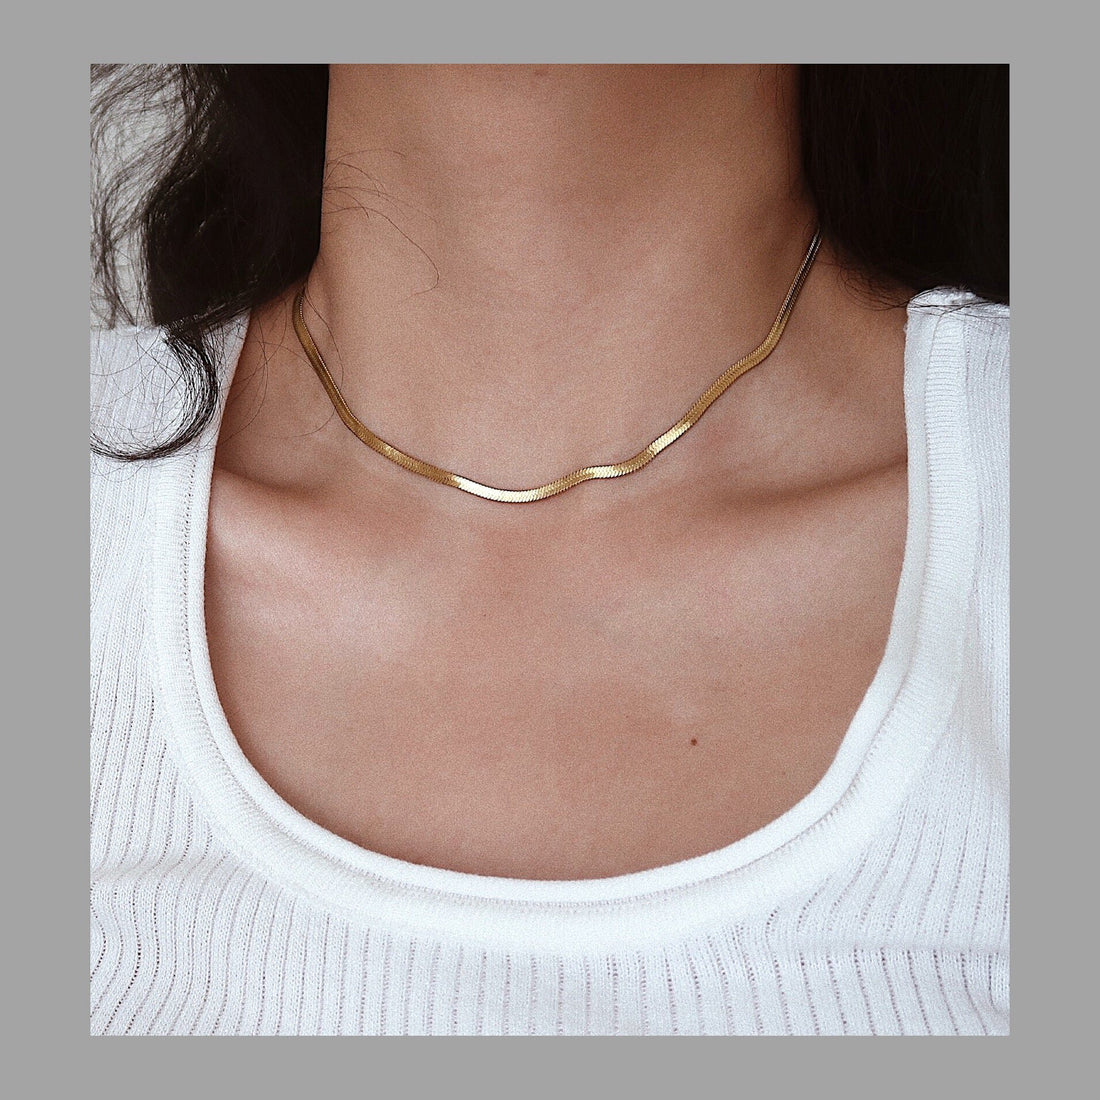 Wide version: Gold plated classic serpentine bone chain necklace - flat - 3mm wide